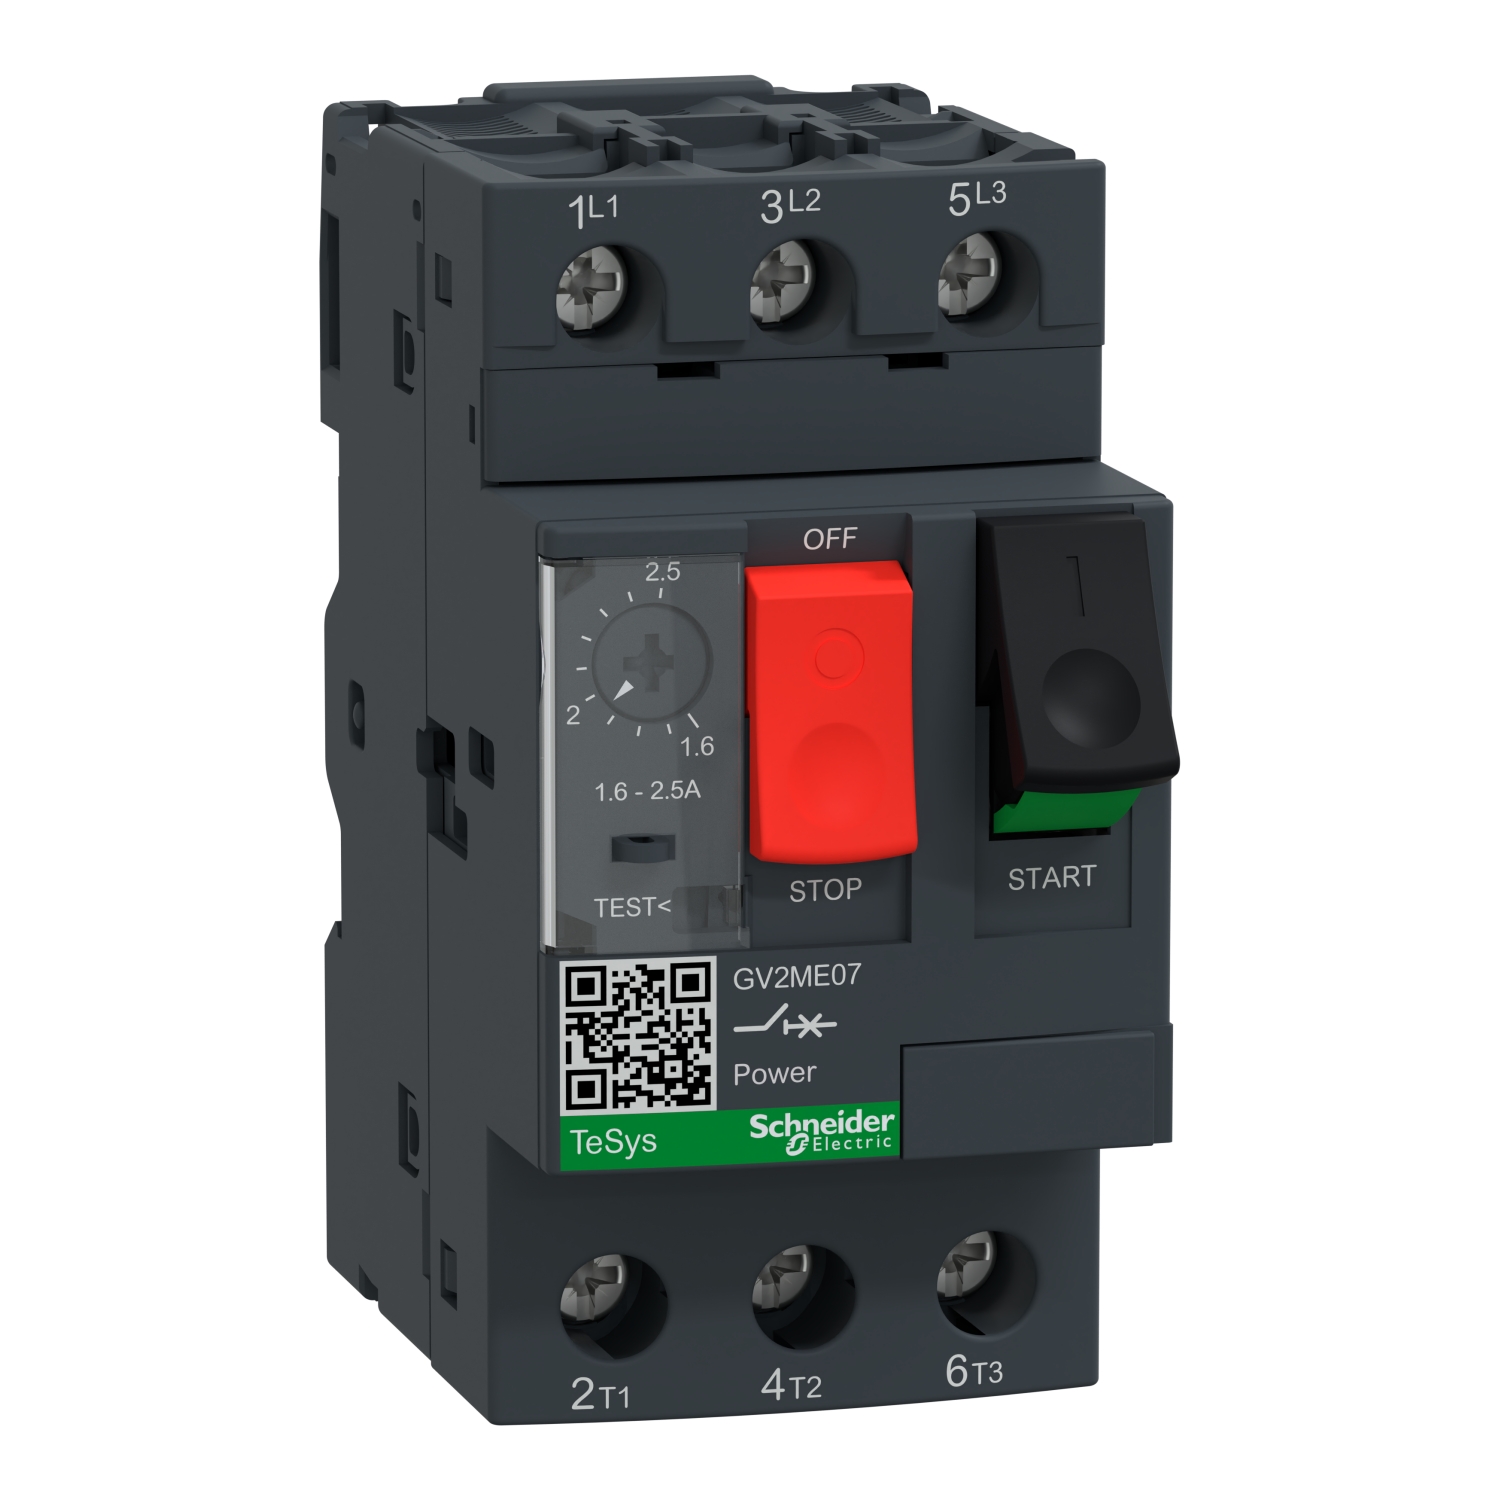 Motor circuit breaker, TeSys Deca, 3P, 1.6 to 2.5A, thermal magnetic, screw clamp terminals, button control